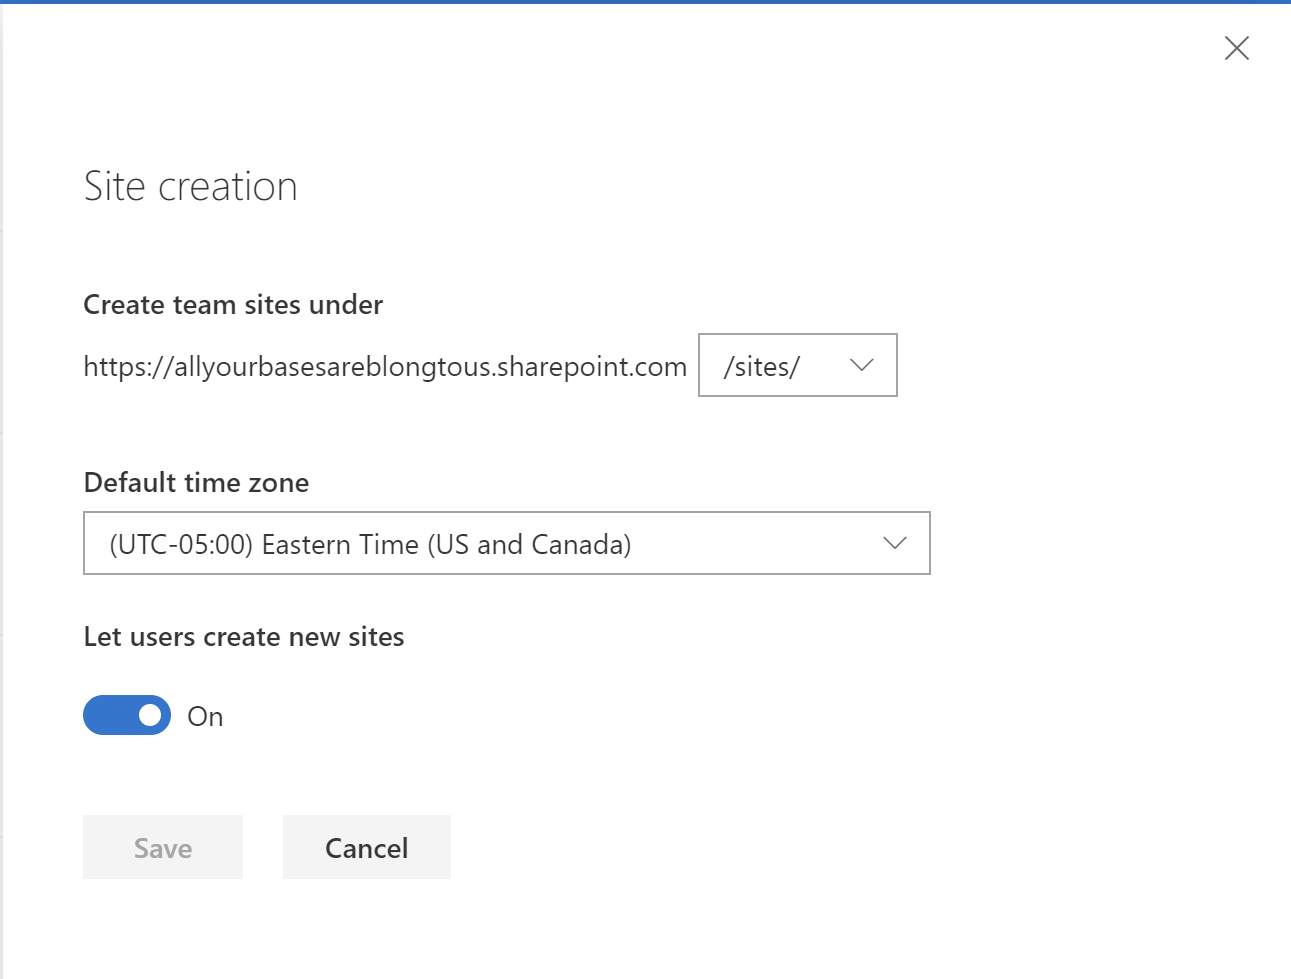 Site Creation pane in SharePoint Admin Settings